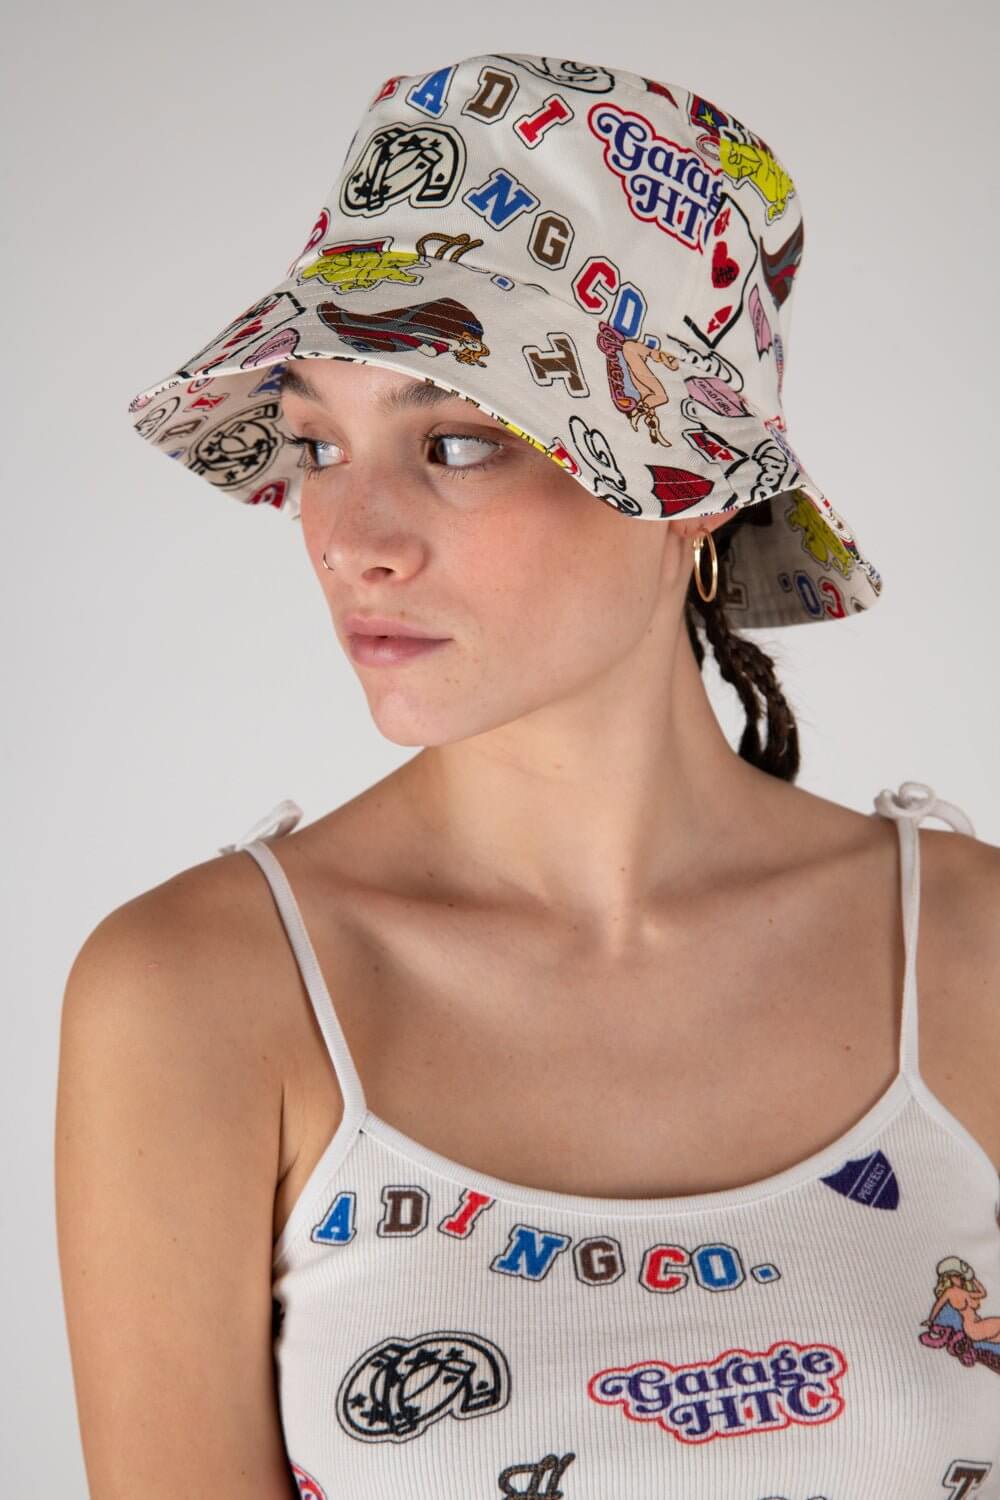 HTC GARAGE BUCKET White overall printed bucket. One size fits all. 100% cotton. HTC LOS ANGELES